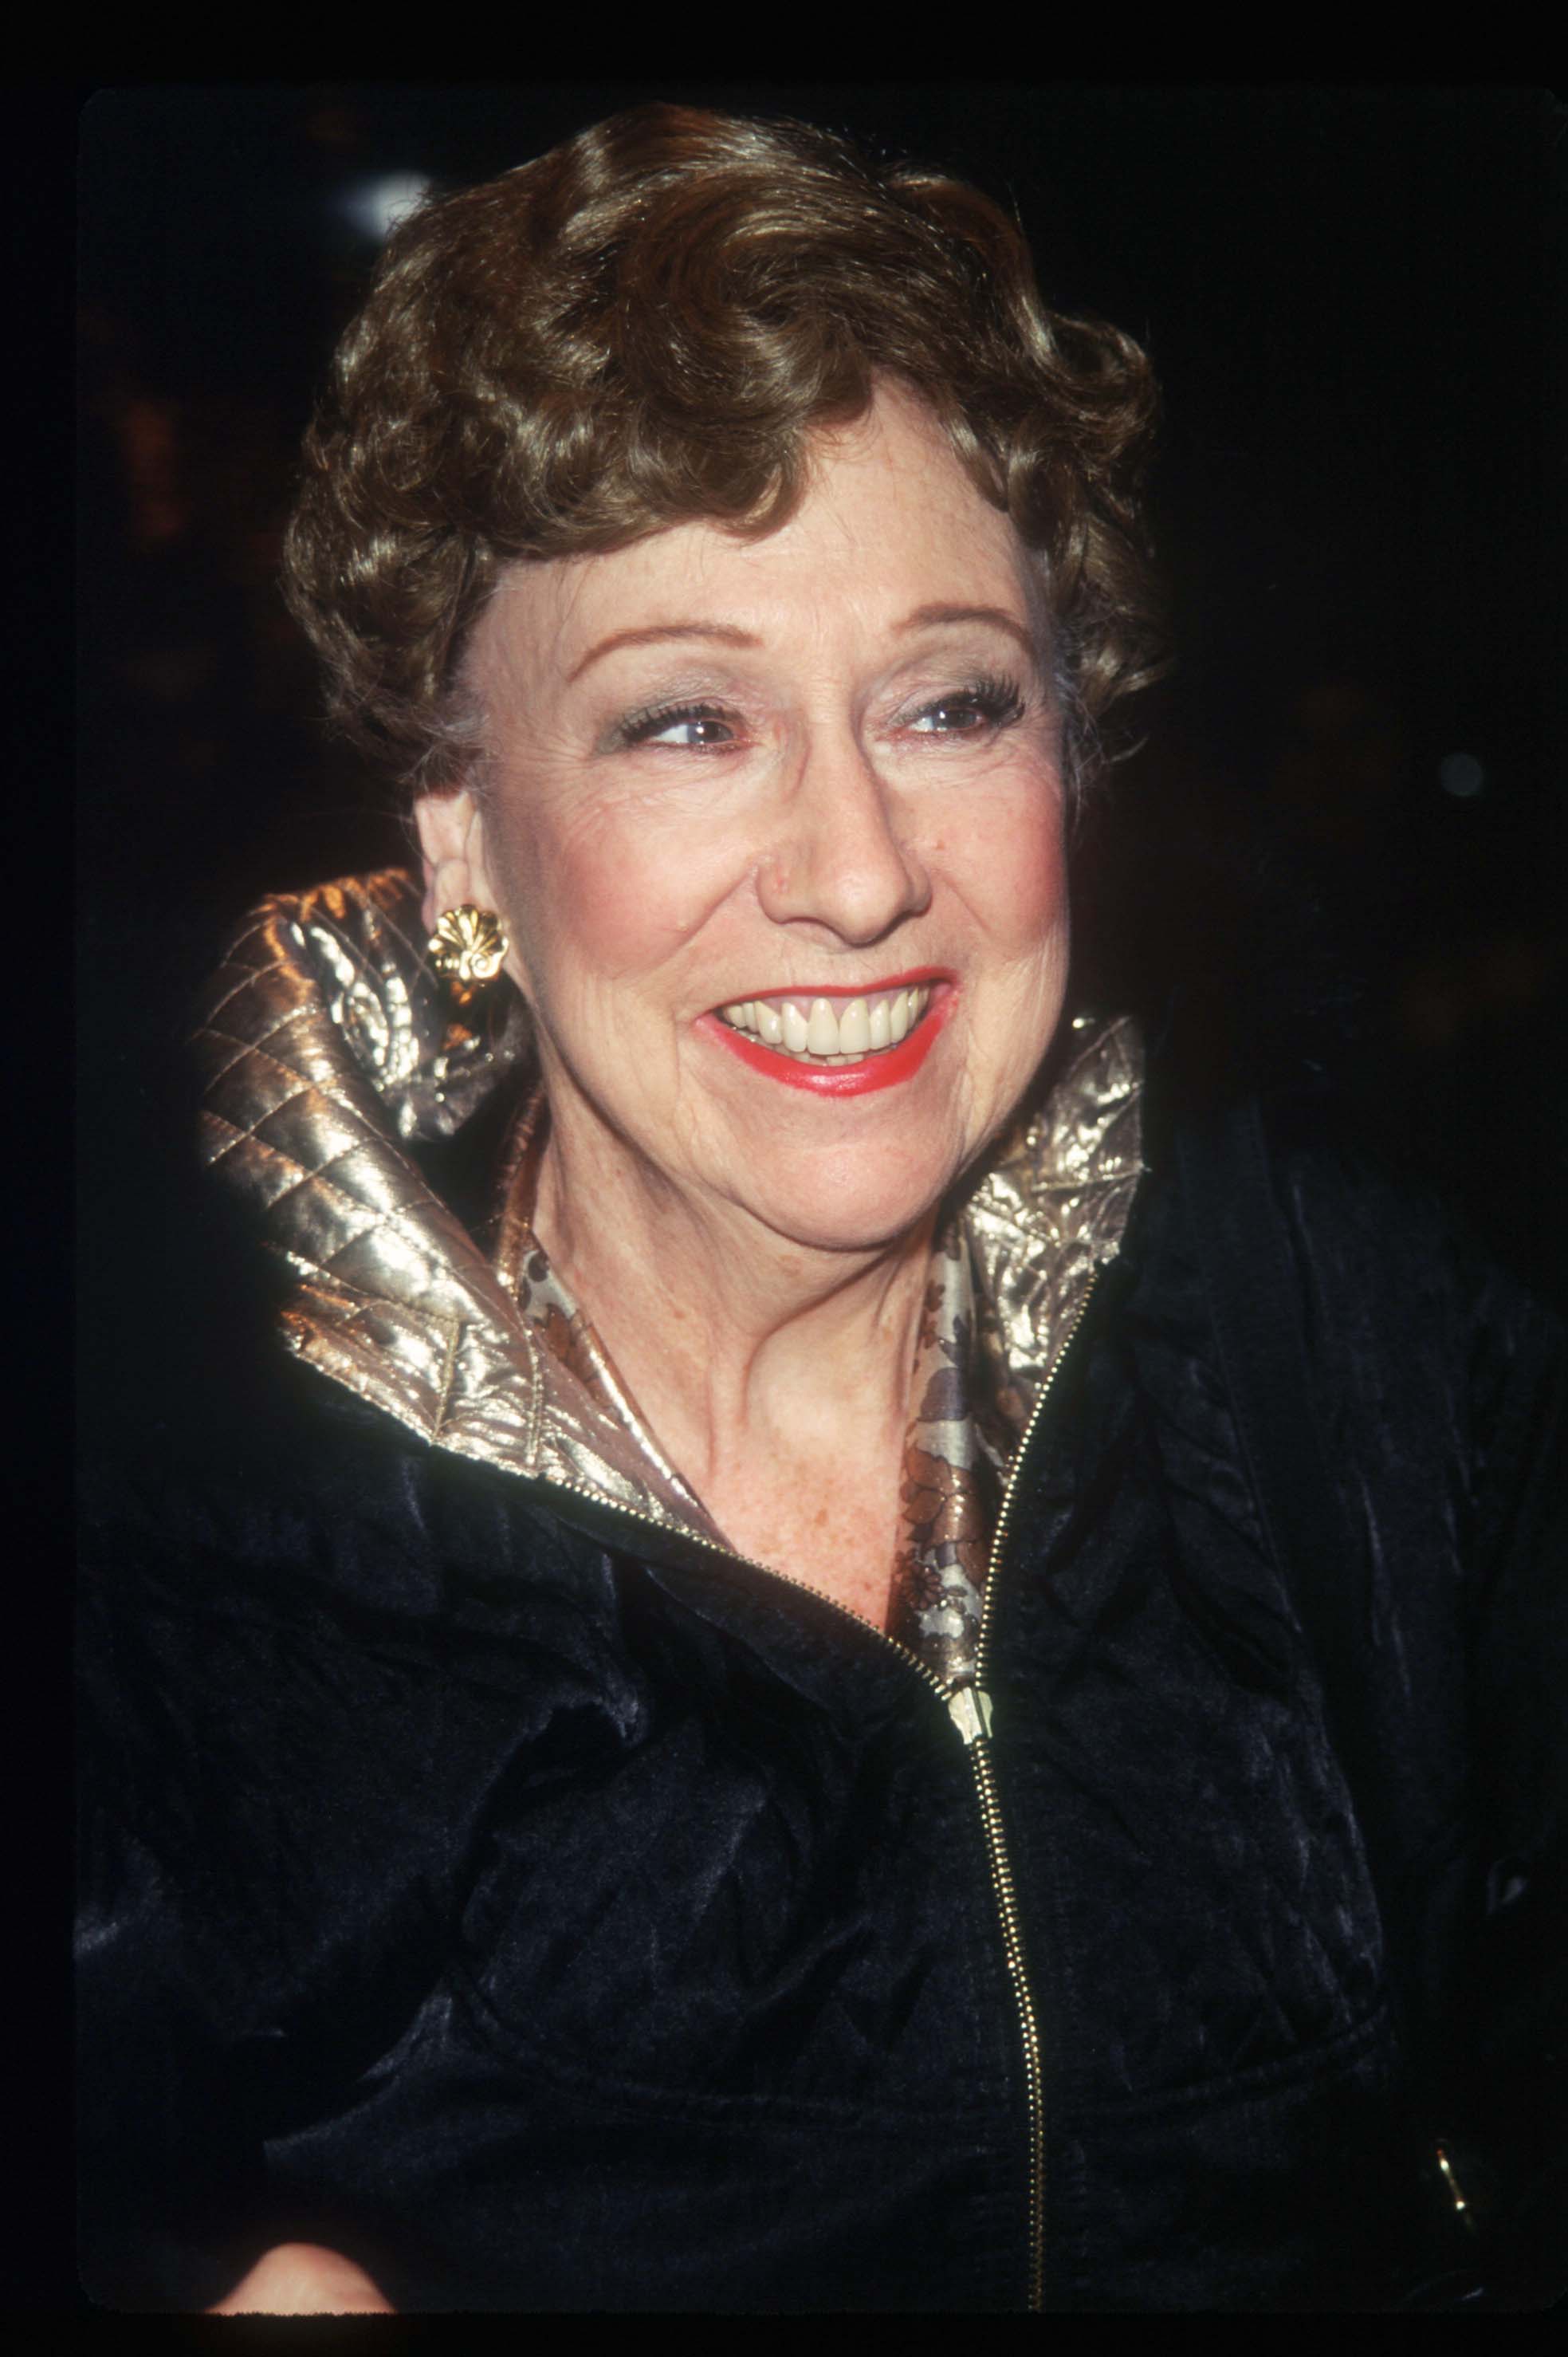 Jean Stapleton at the premiere of the film "Michael" December 15, 1996 in New York City. | Photo: Getty Images